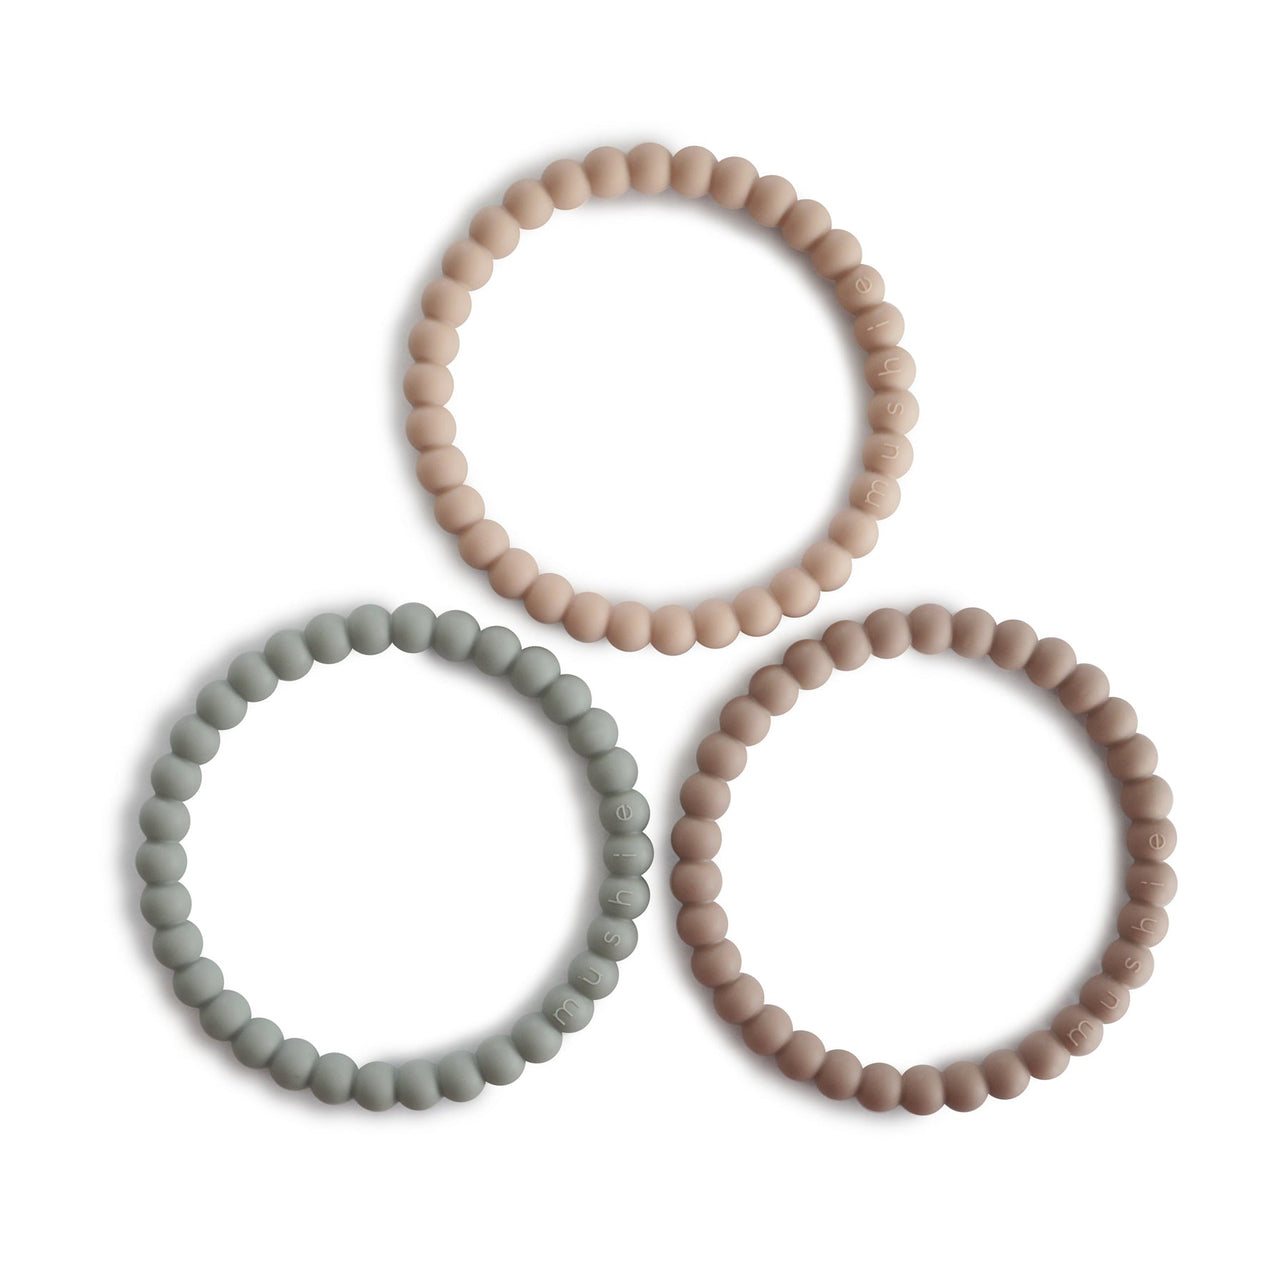 Pearl Teether Bracelet 3 pack- Clary Sage/Tuscany/Desert Sand